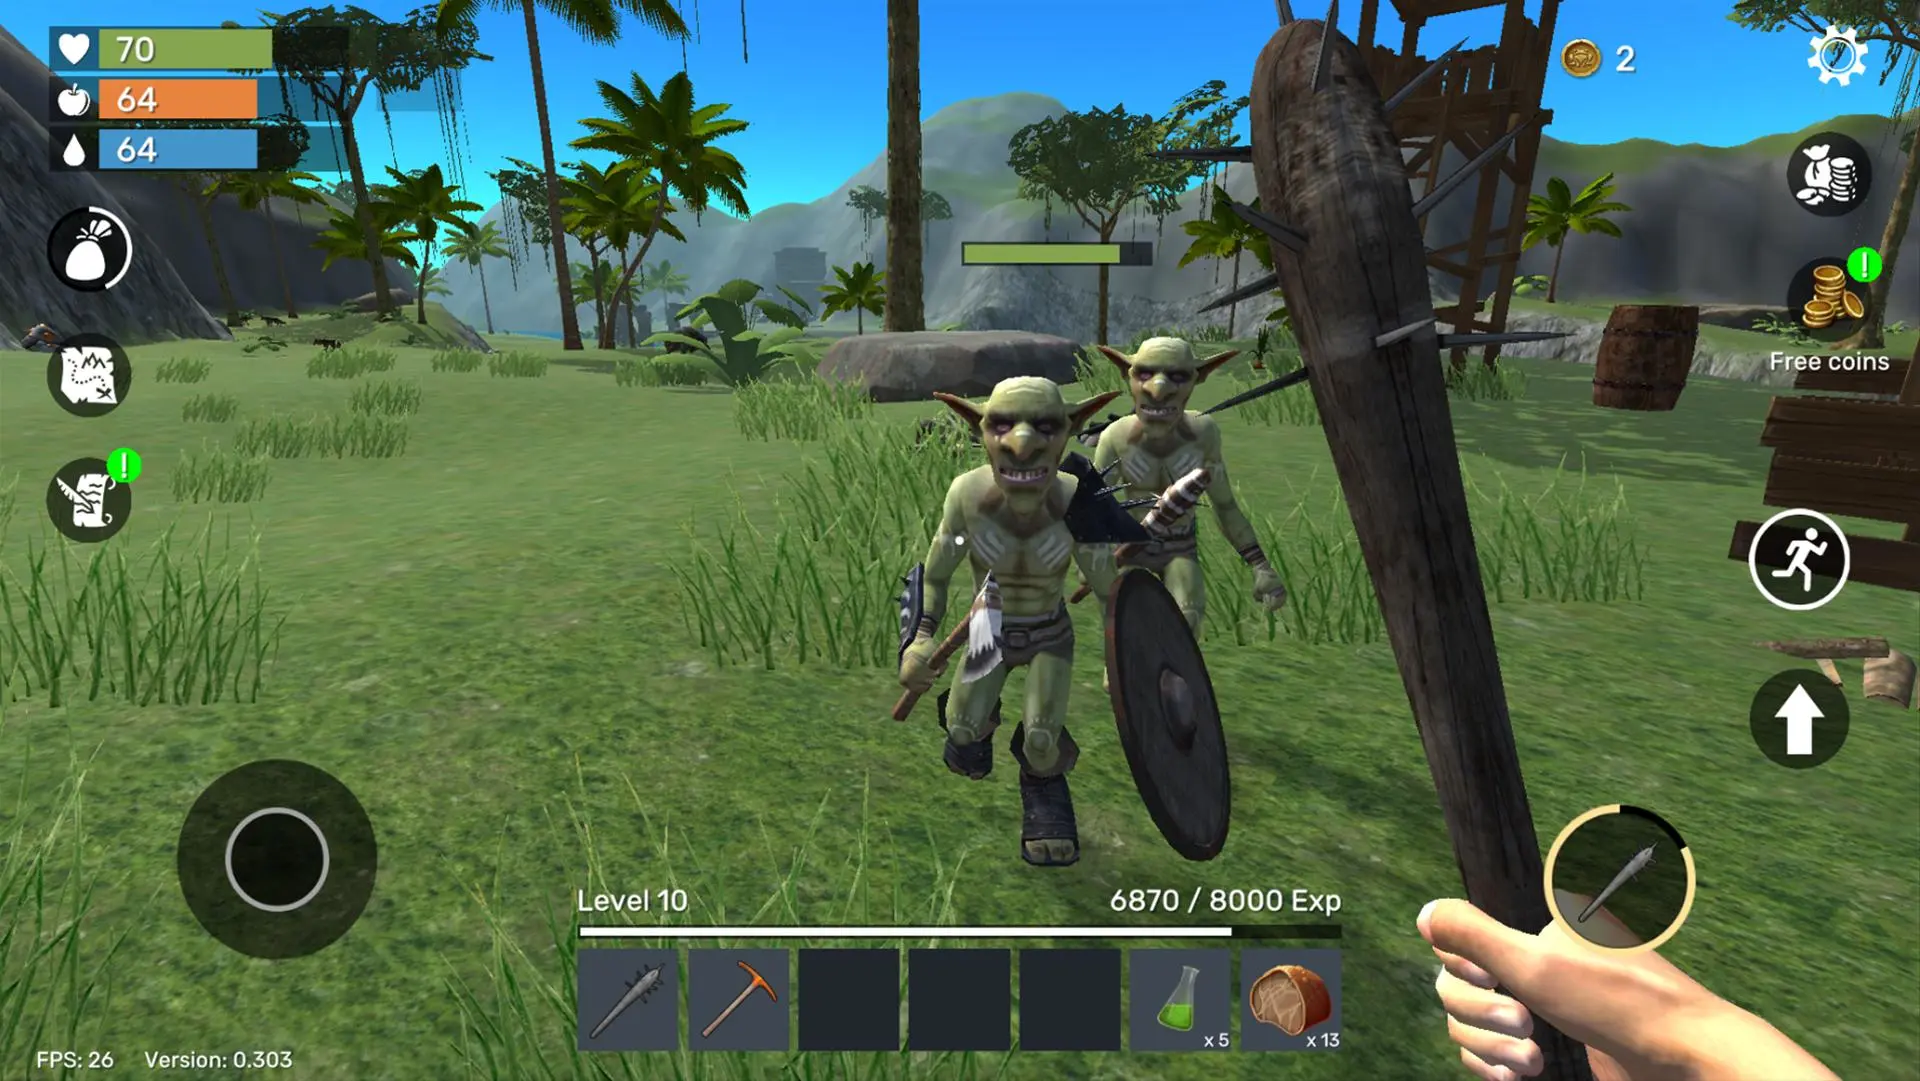 Download Uncharted Island: Survival RPG android on PC